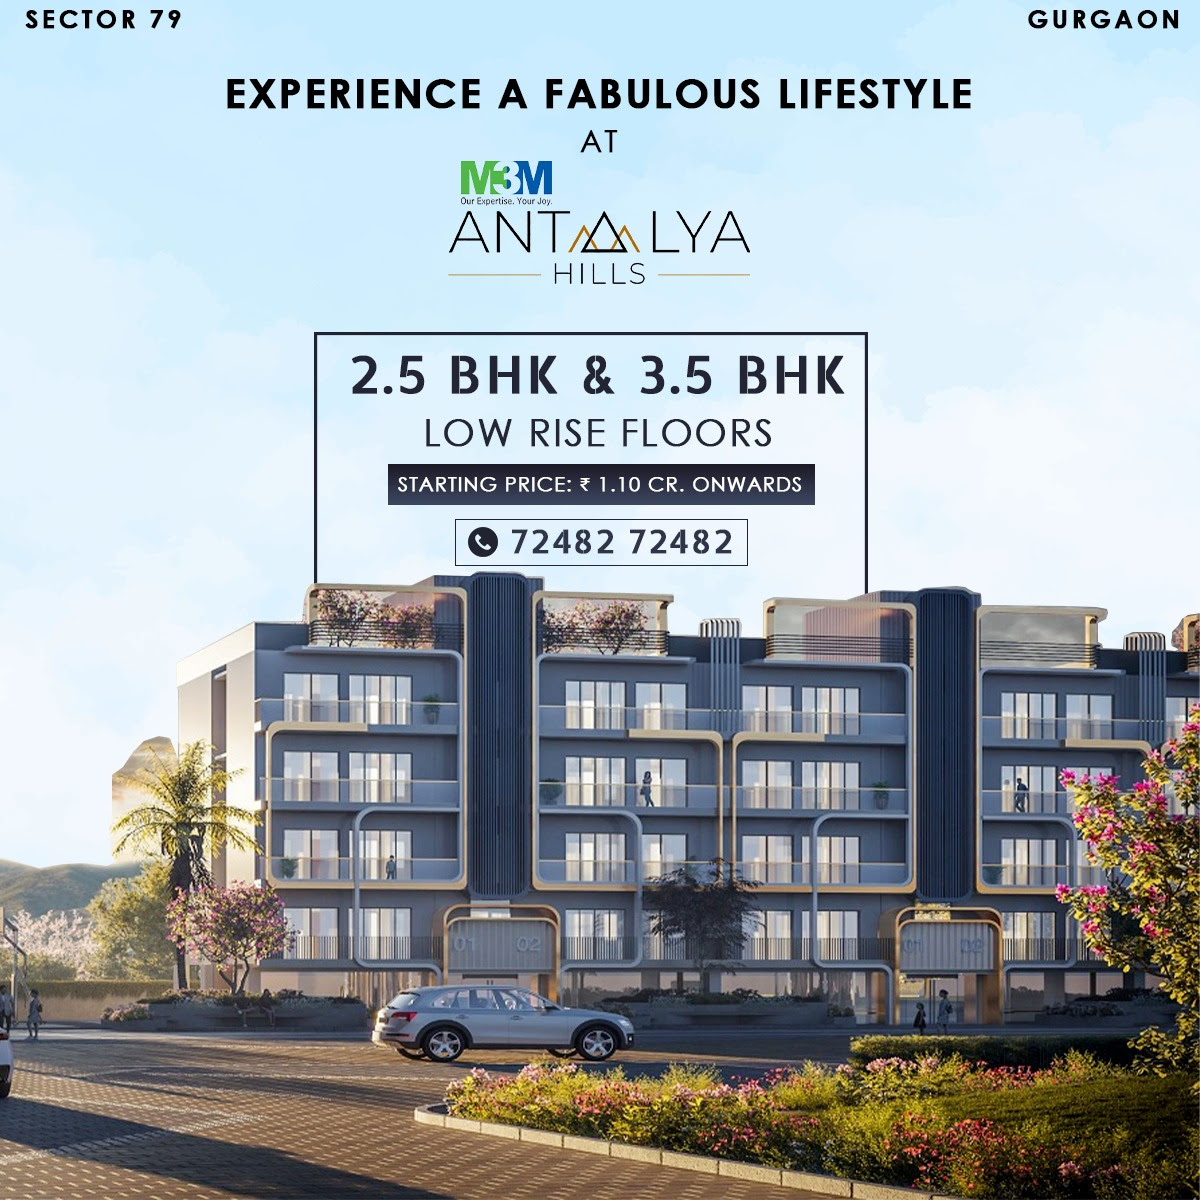 Launched 2.5 & 3.5 BHK air conditioned luxury floors at M3M Antalya Hills in Sec 79, Gurgaon